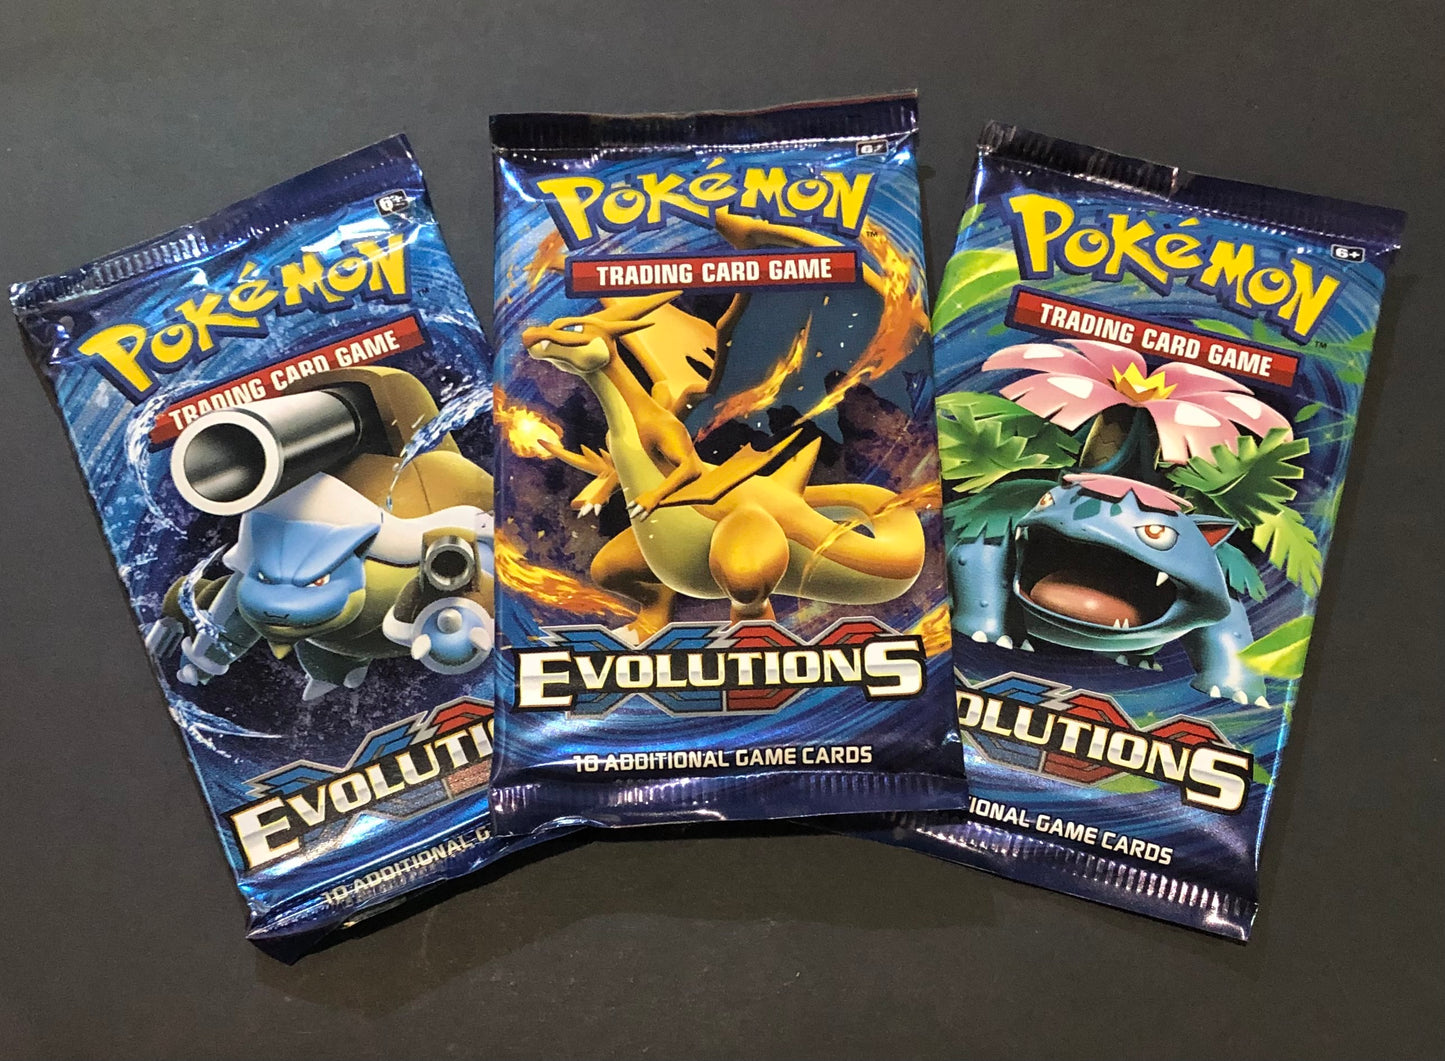 Pokemon XY Evolutions Booster Pack